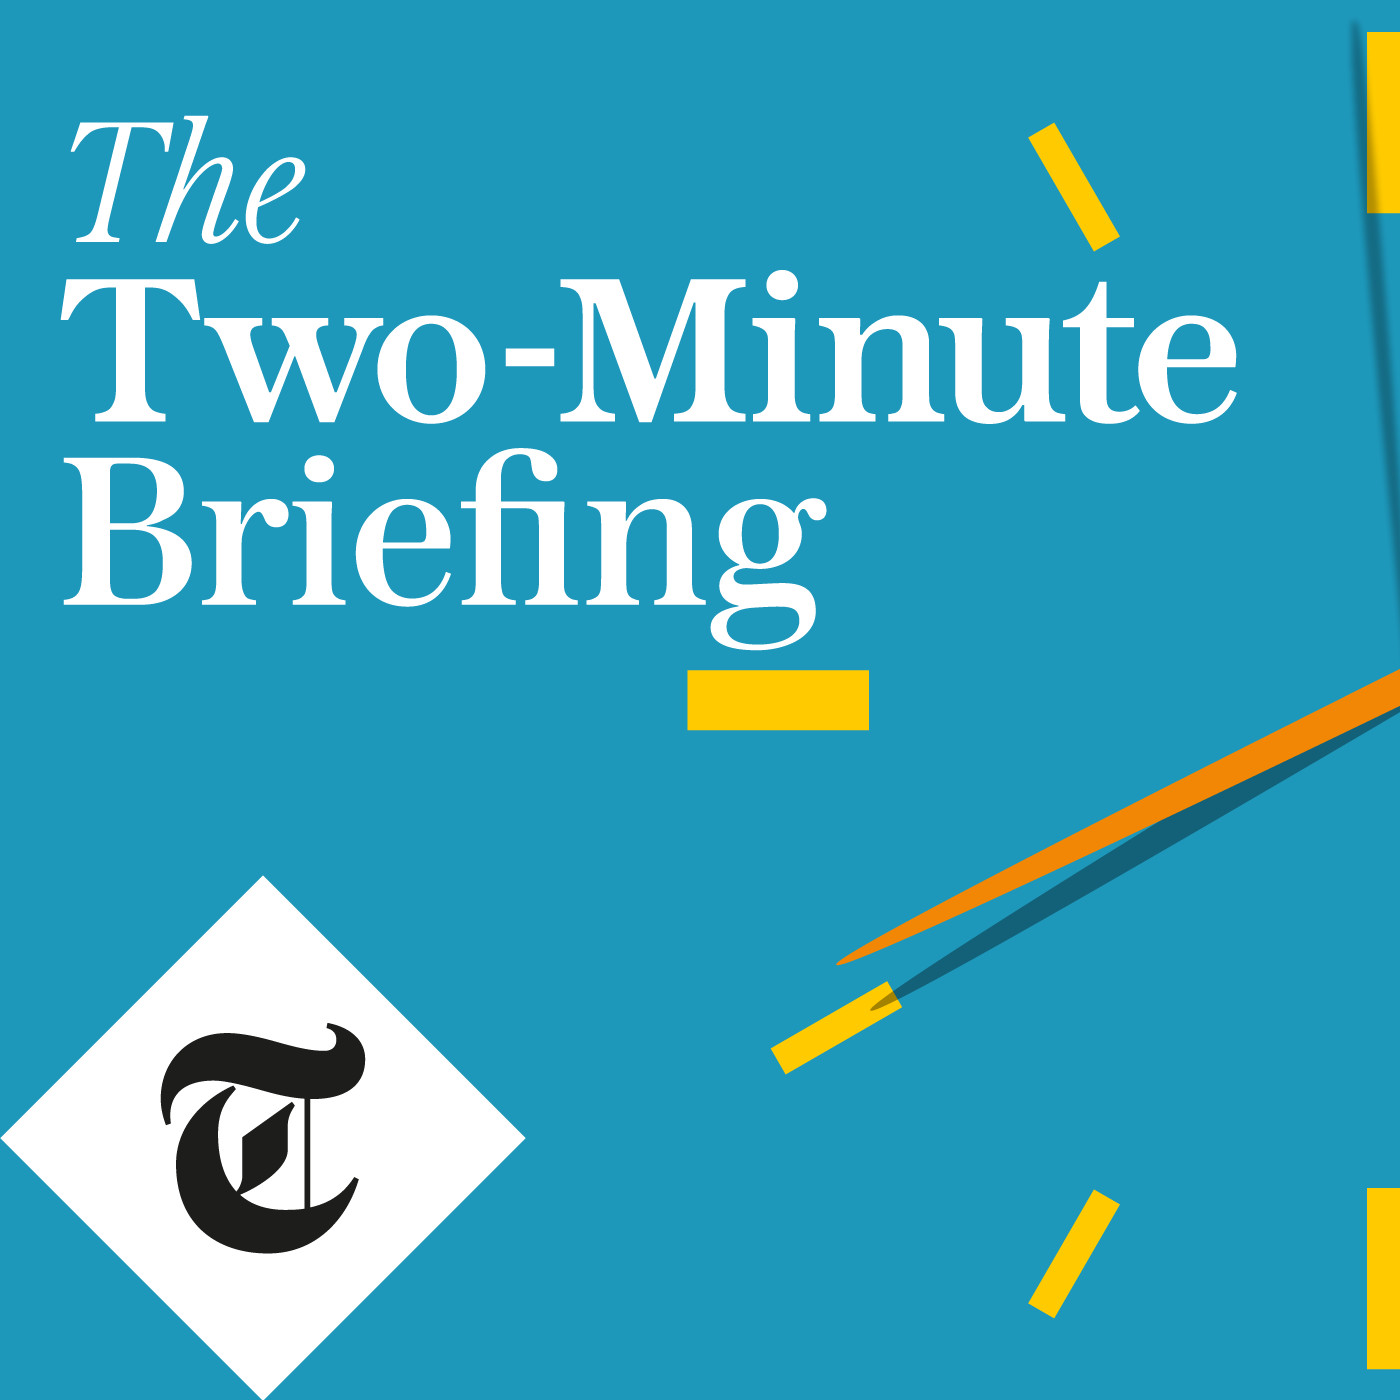 The Two-Minute Briefing